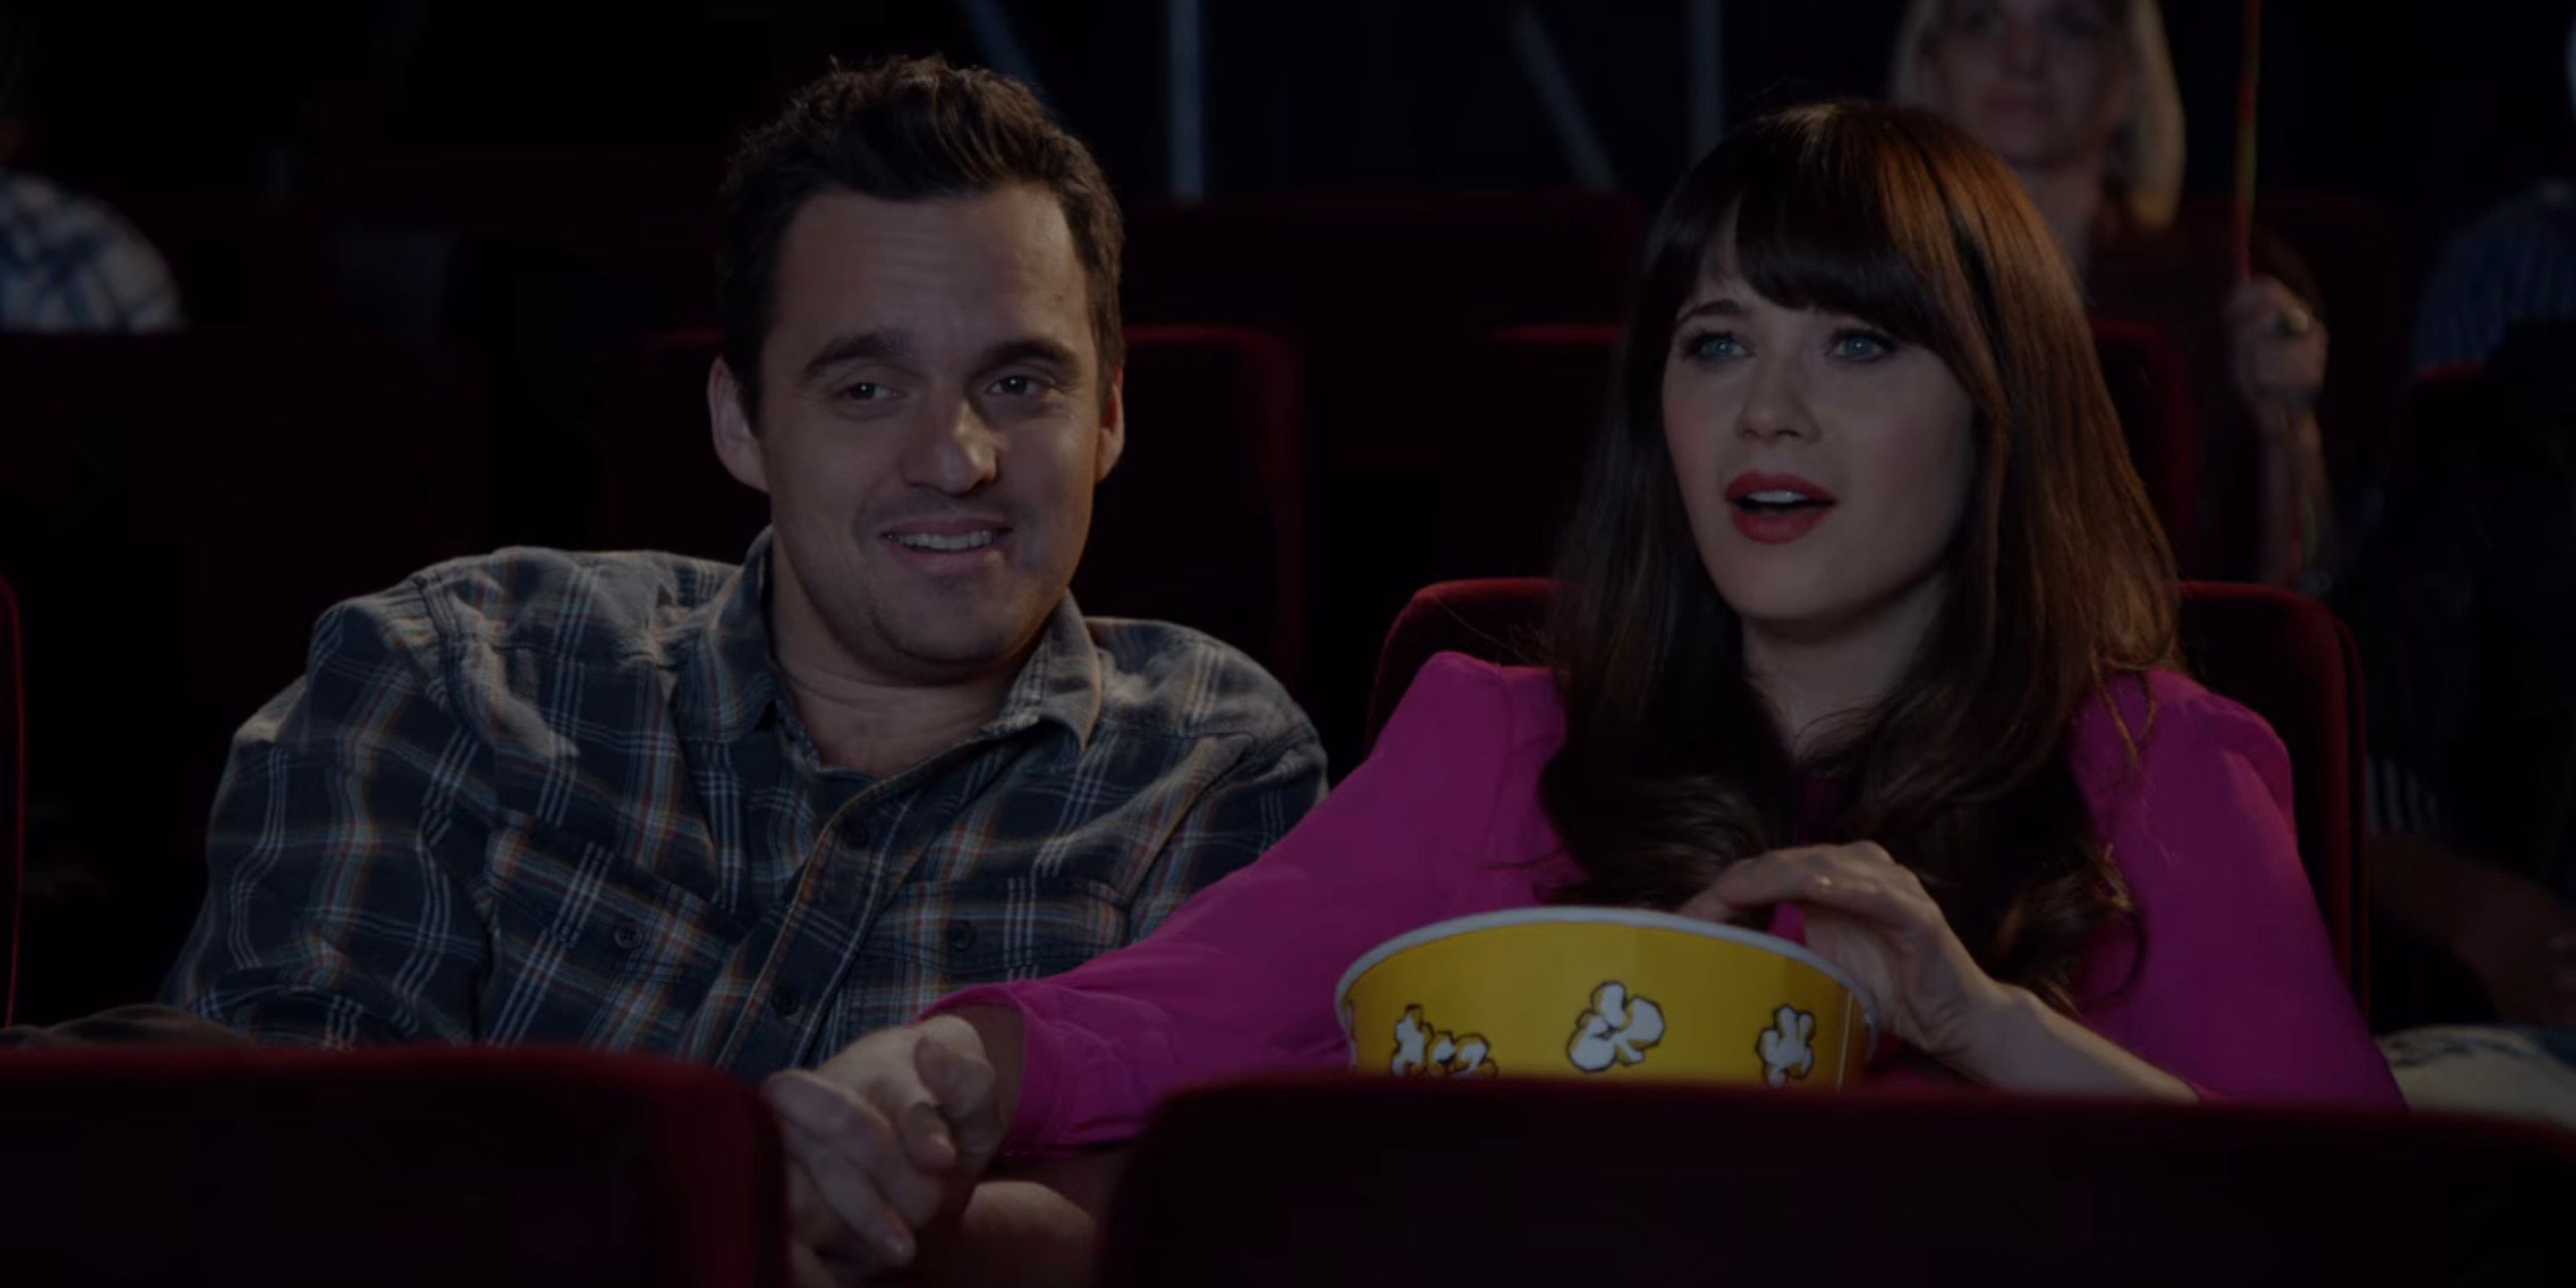 Nick and Jess sit together in a movie theater for her birthday celebration in New Girl